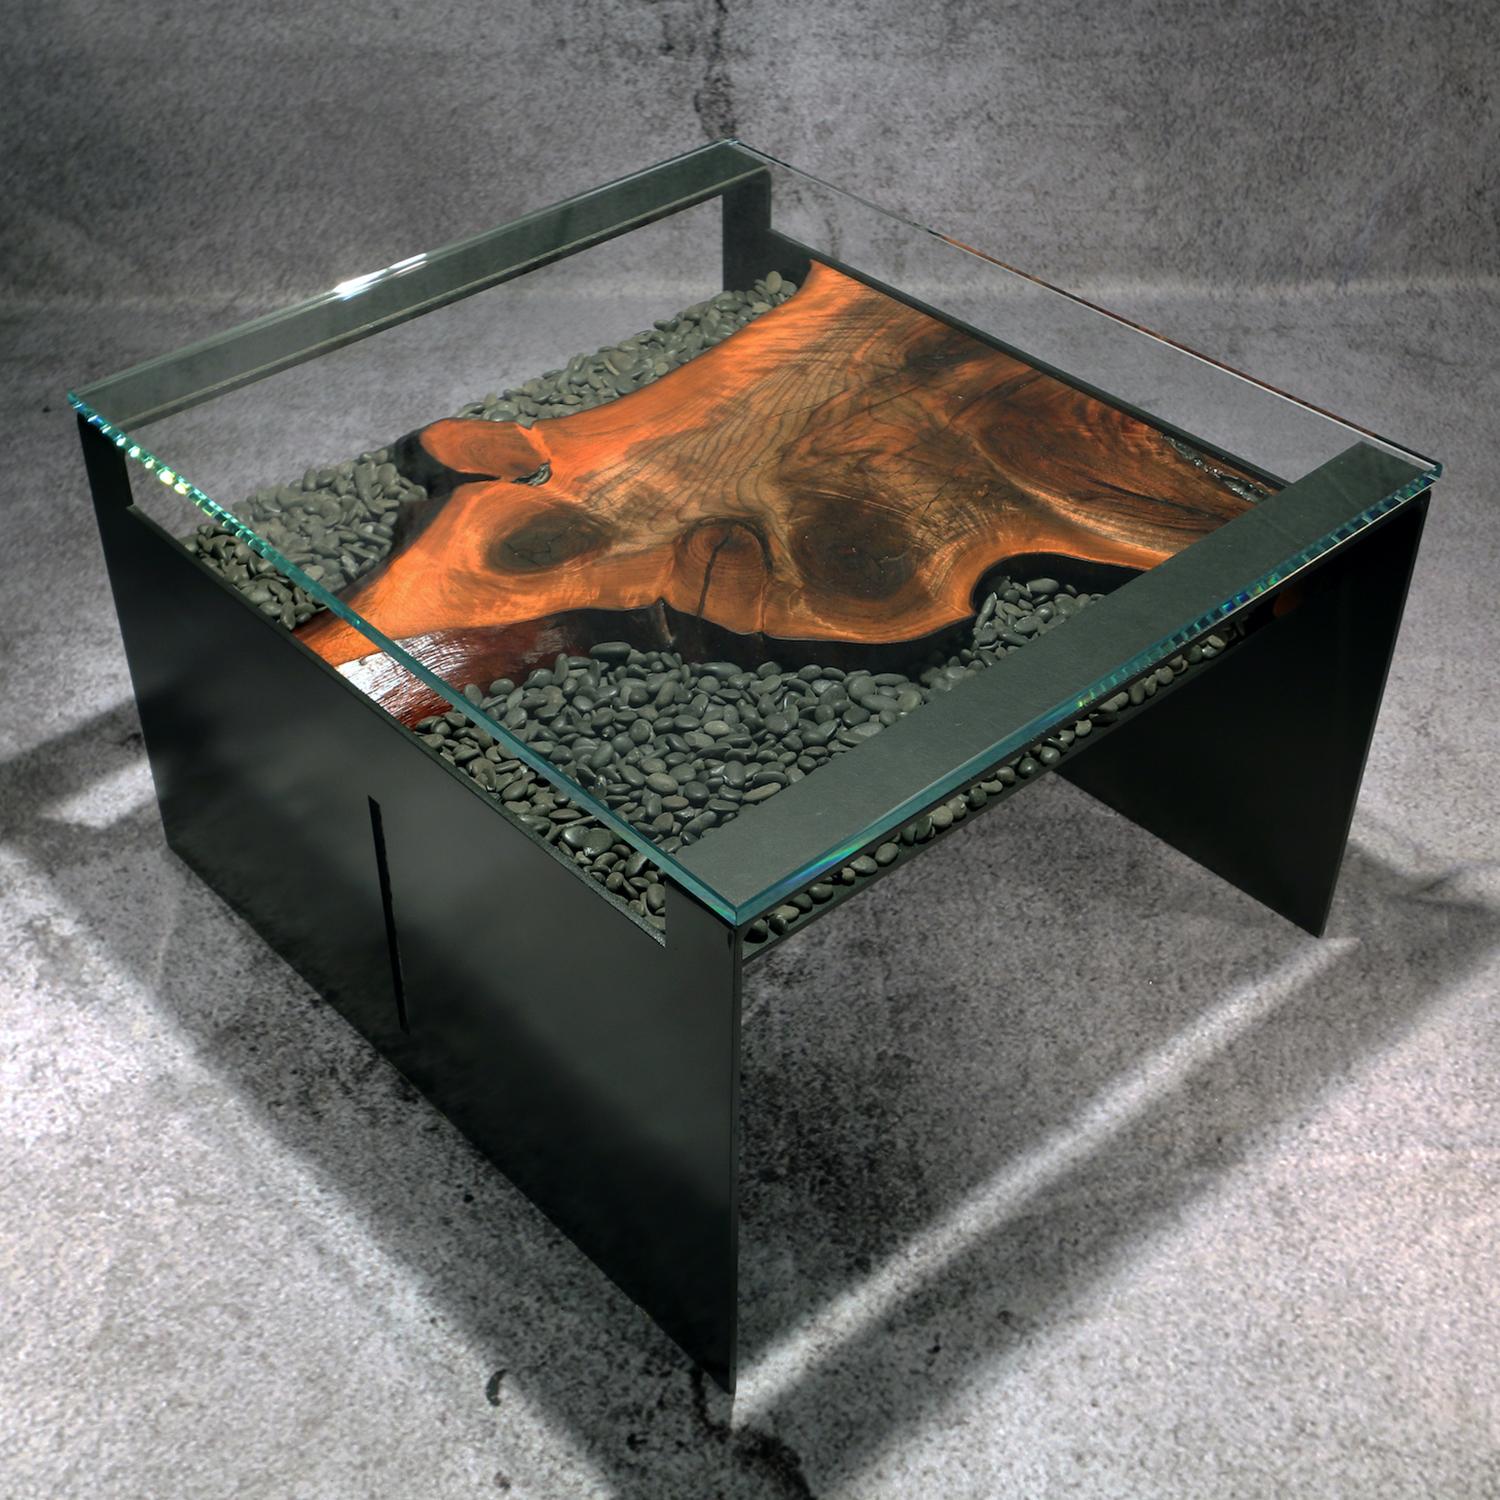 Kojima (Island) cocktail table is conceived, designed and created by award-winning artist and architectural designer Michael Olshefski of Primal Modern. Inspired by the interactions between land and water, this gorgeous table showcasing highly